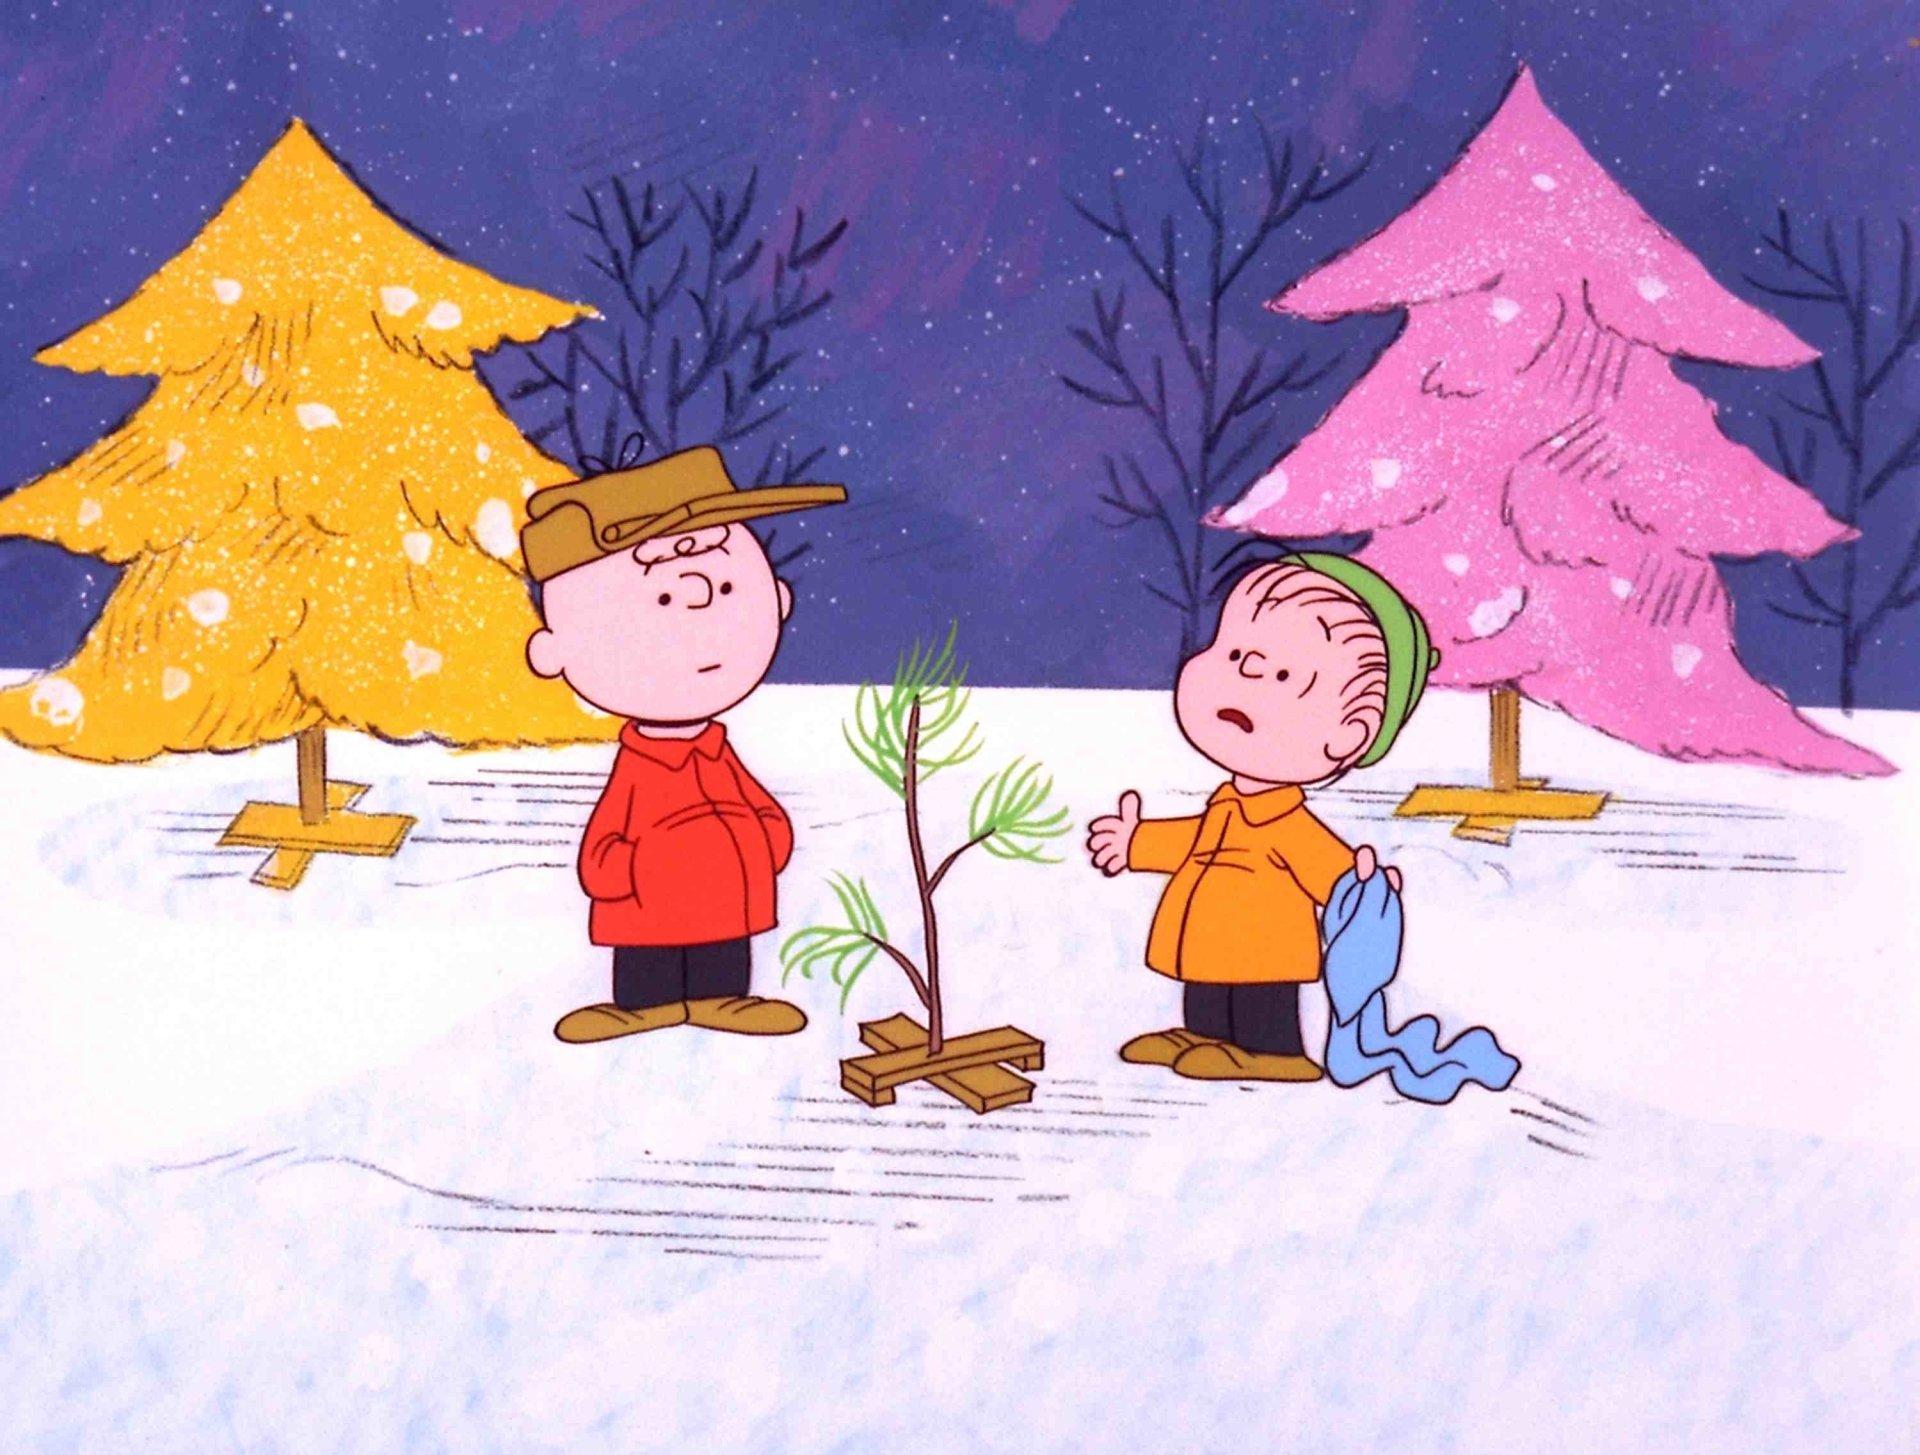 A Charlie Brown Christmas HD Wallpaper. Background